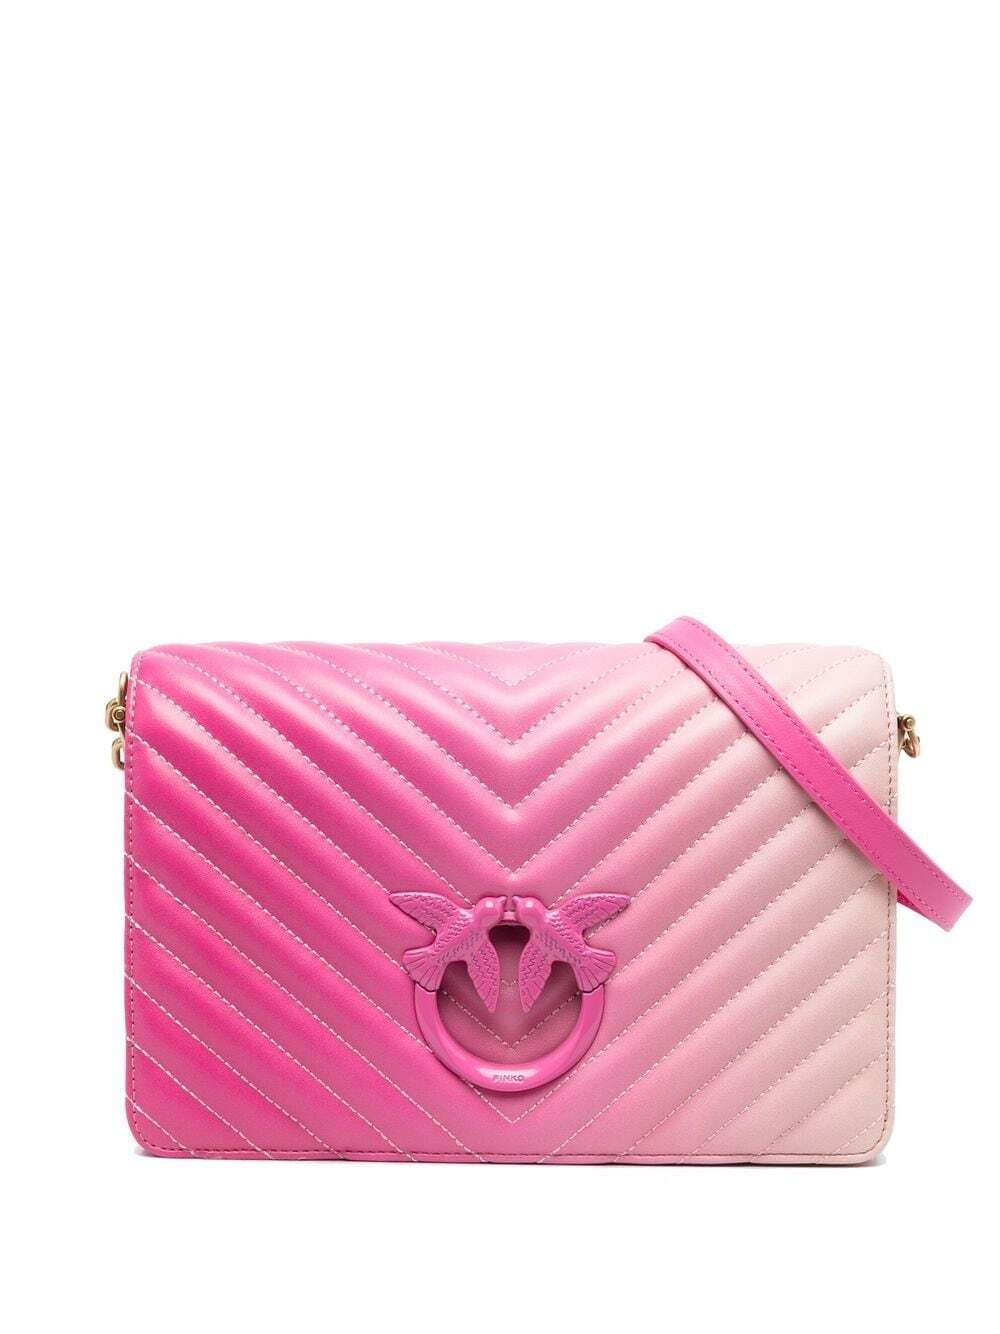 PINKO Love quilted leather crossbody bag in pink